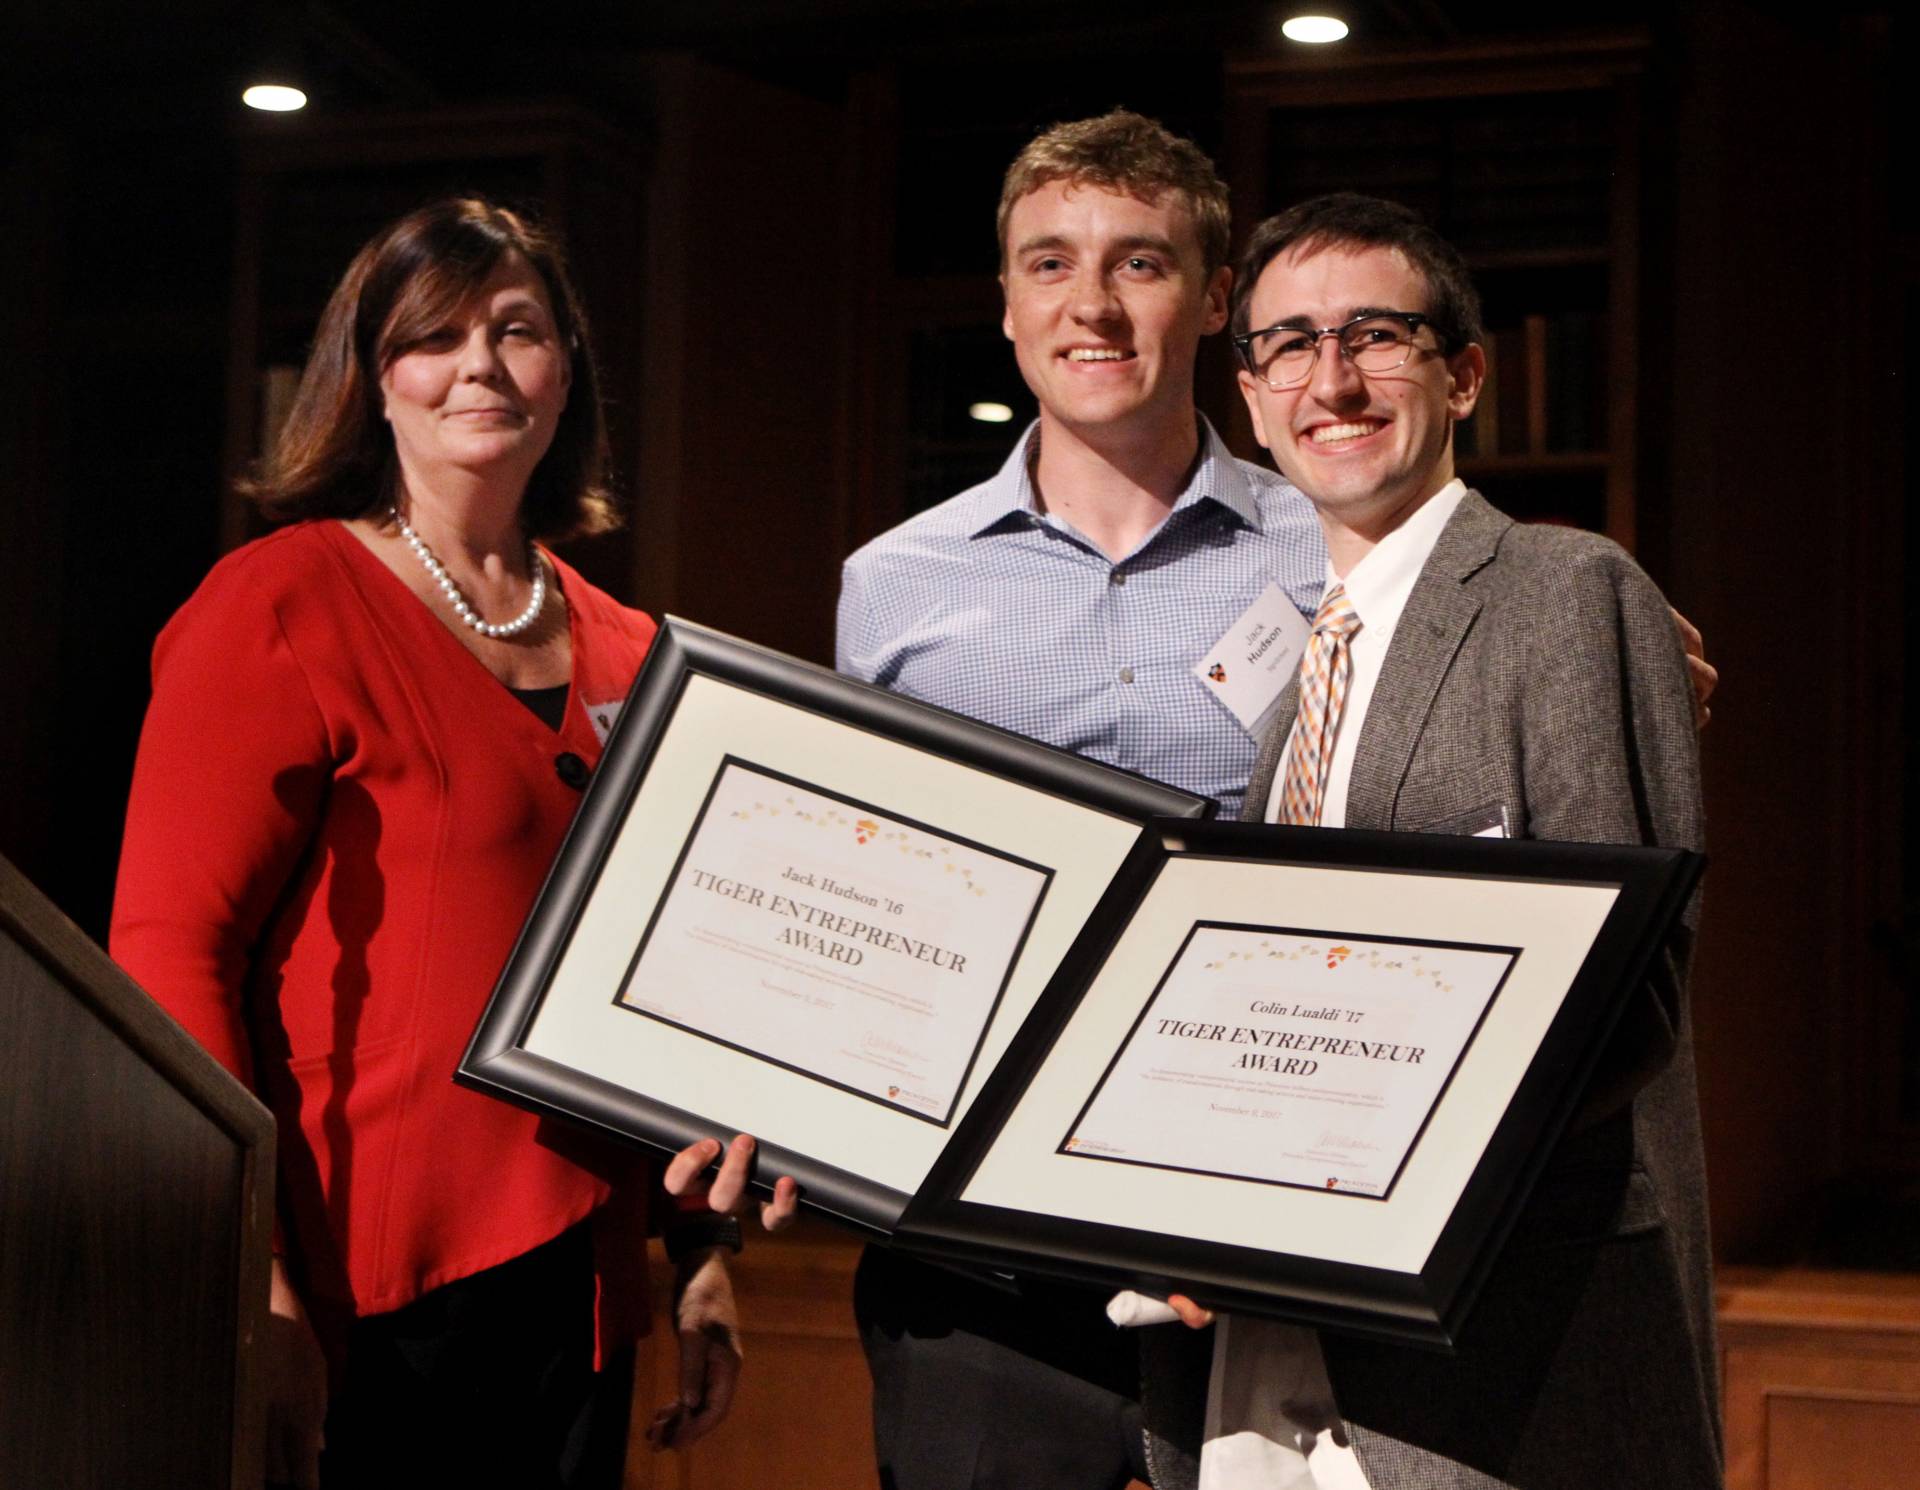 Anne-Marie Maman with princeton student award winners Jack Hudson and Colin Lualdi